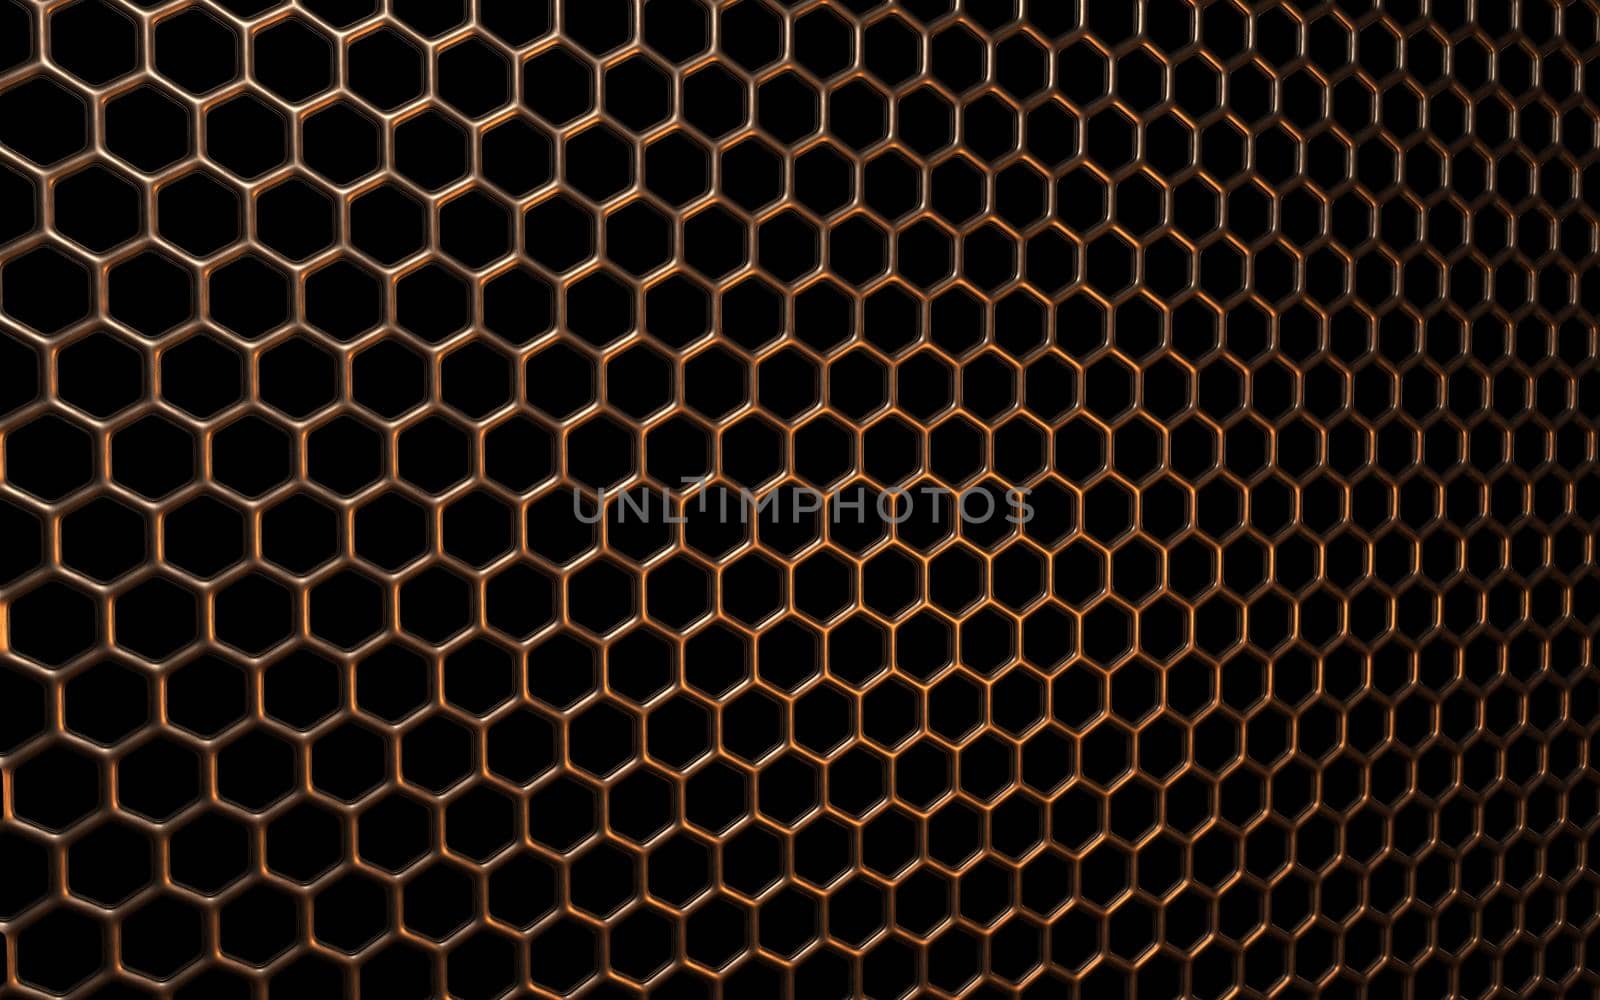 Beautiful pattern of bronze mesh on a black background by Milanchikov